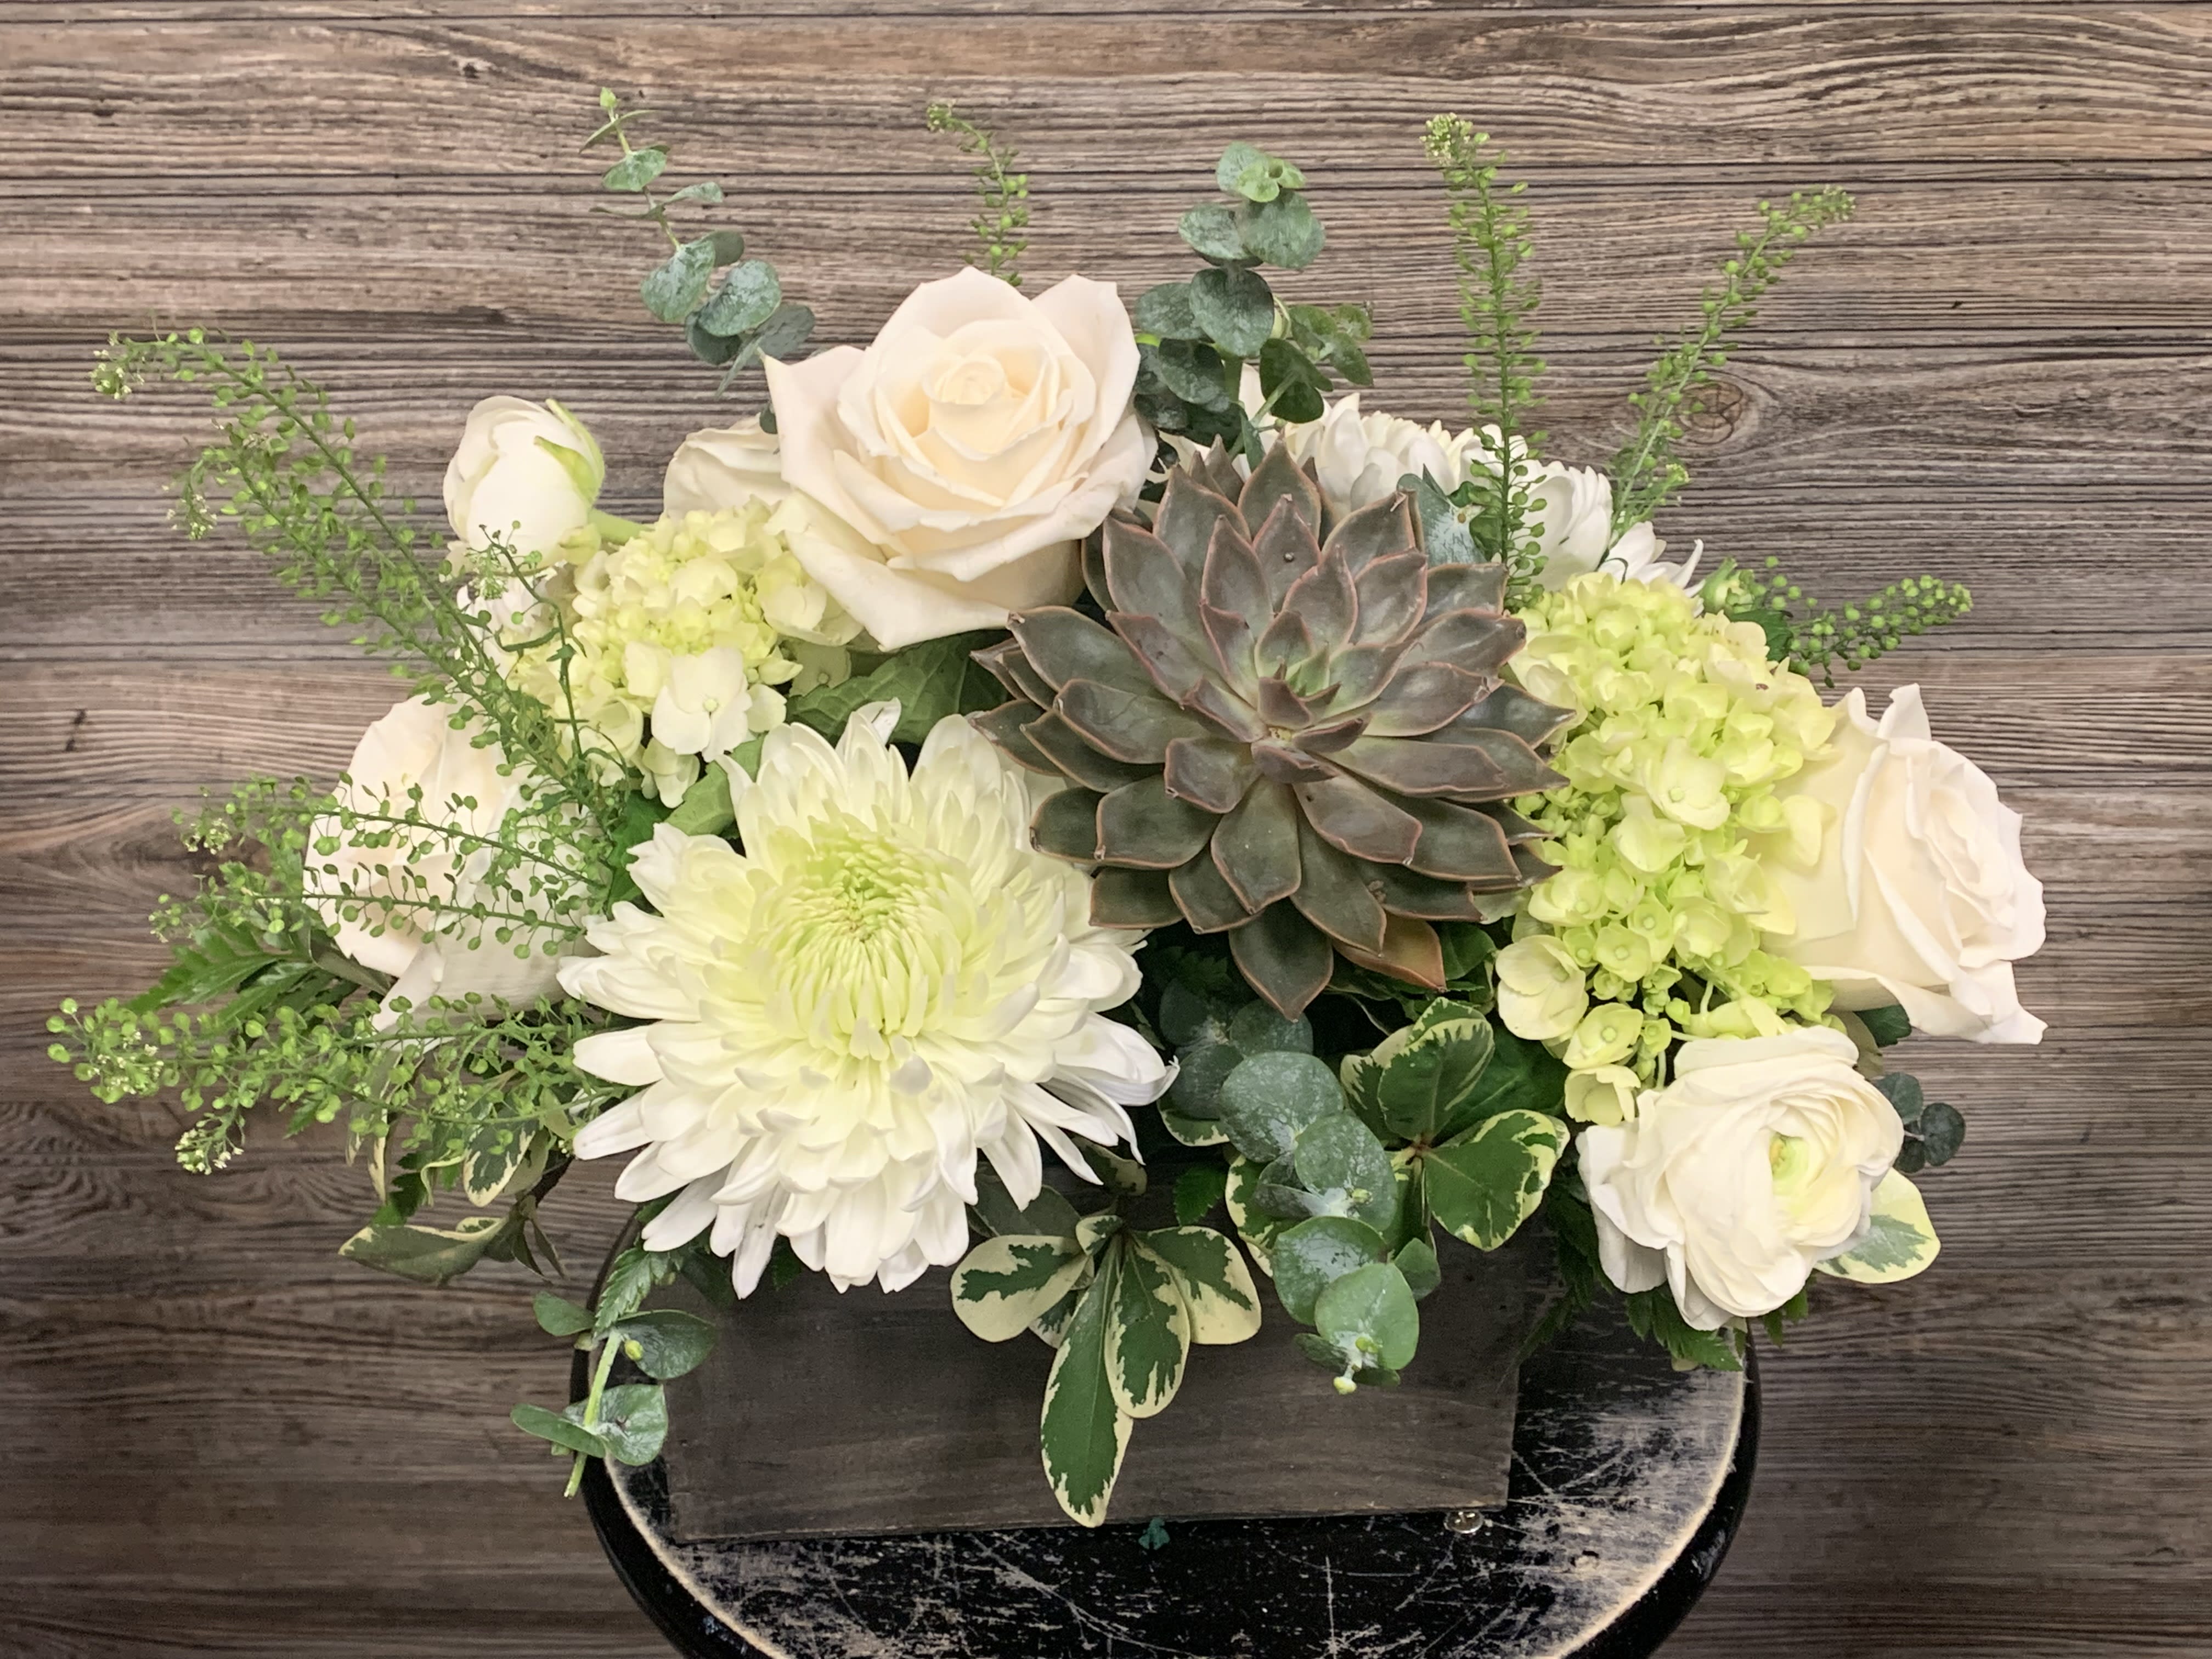 White Rustic Box  - Wooden 7x5 rustic wooden box accented with a succulent. white cremons, green hydrangeas, green dragon, ranunculus, roses and seasonal greenery. 